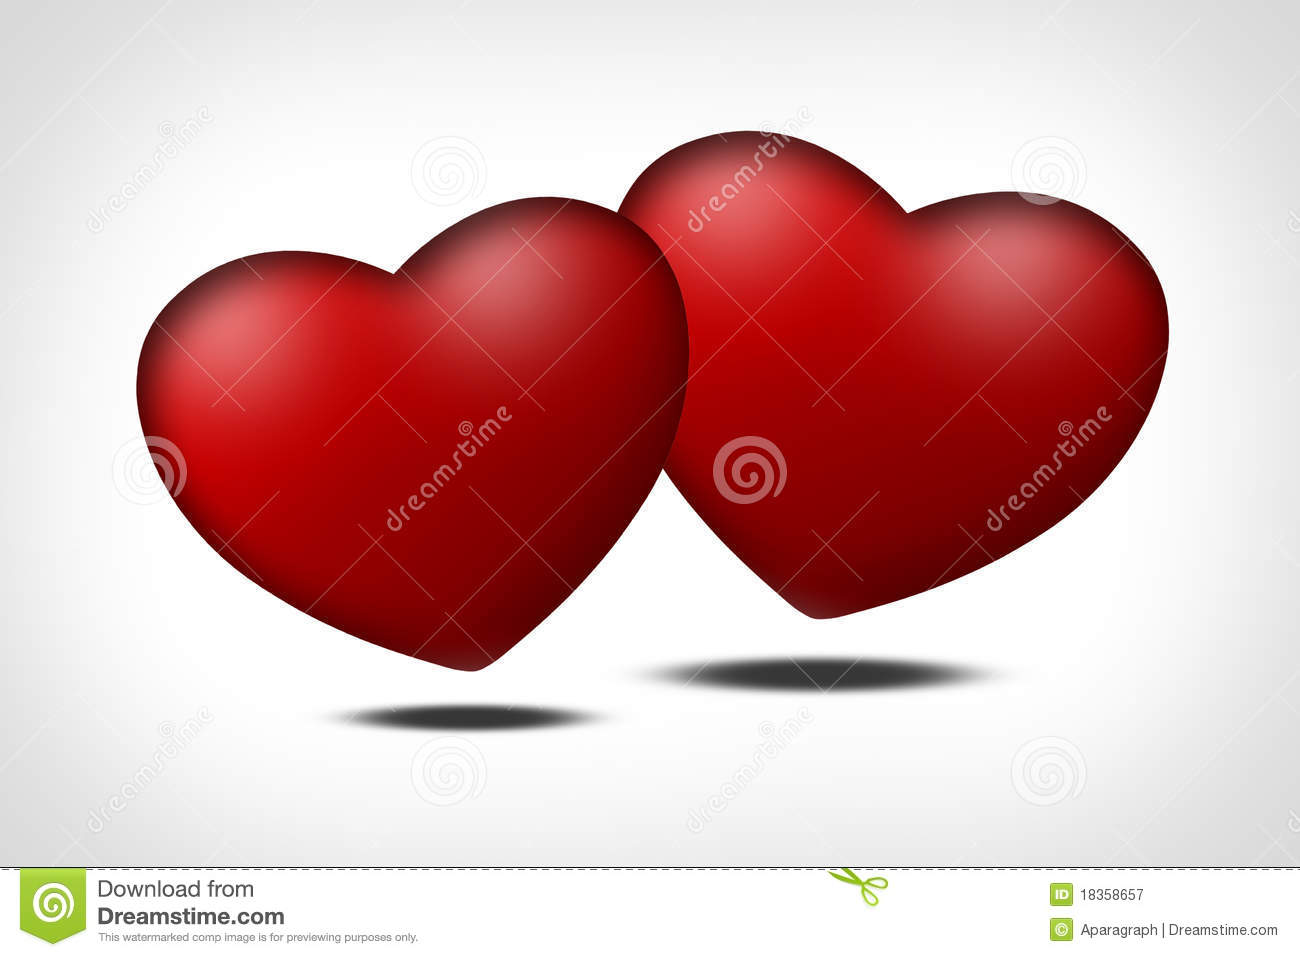 Two Red Hearts   Symbol Of Love Royalty Free Stock Photography   Image